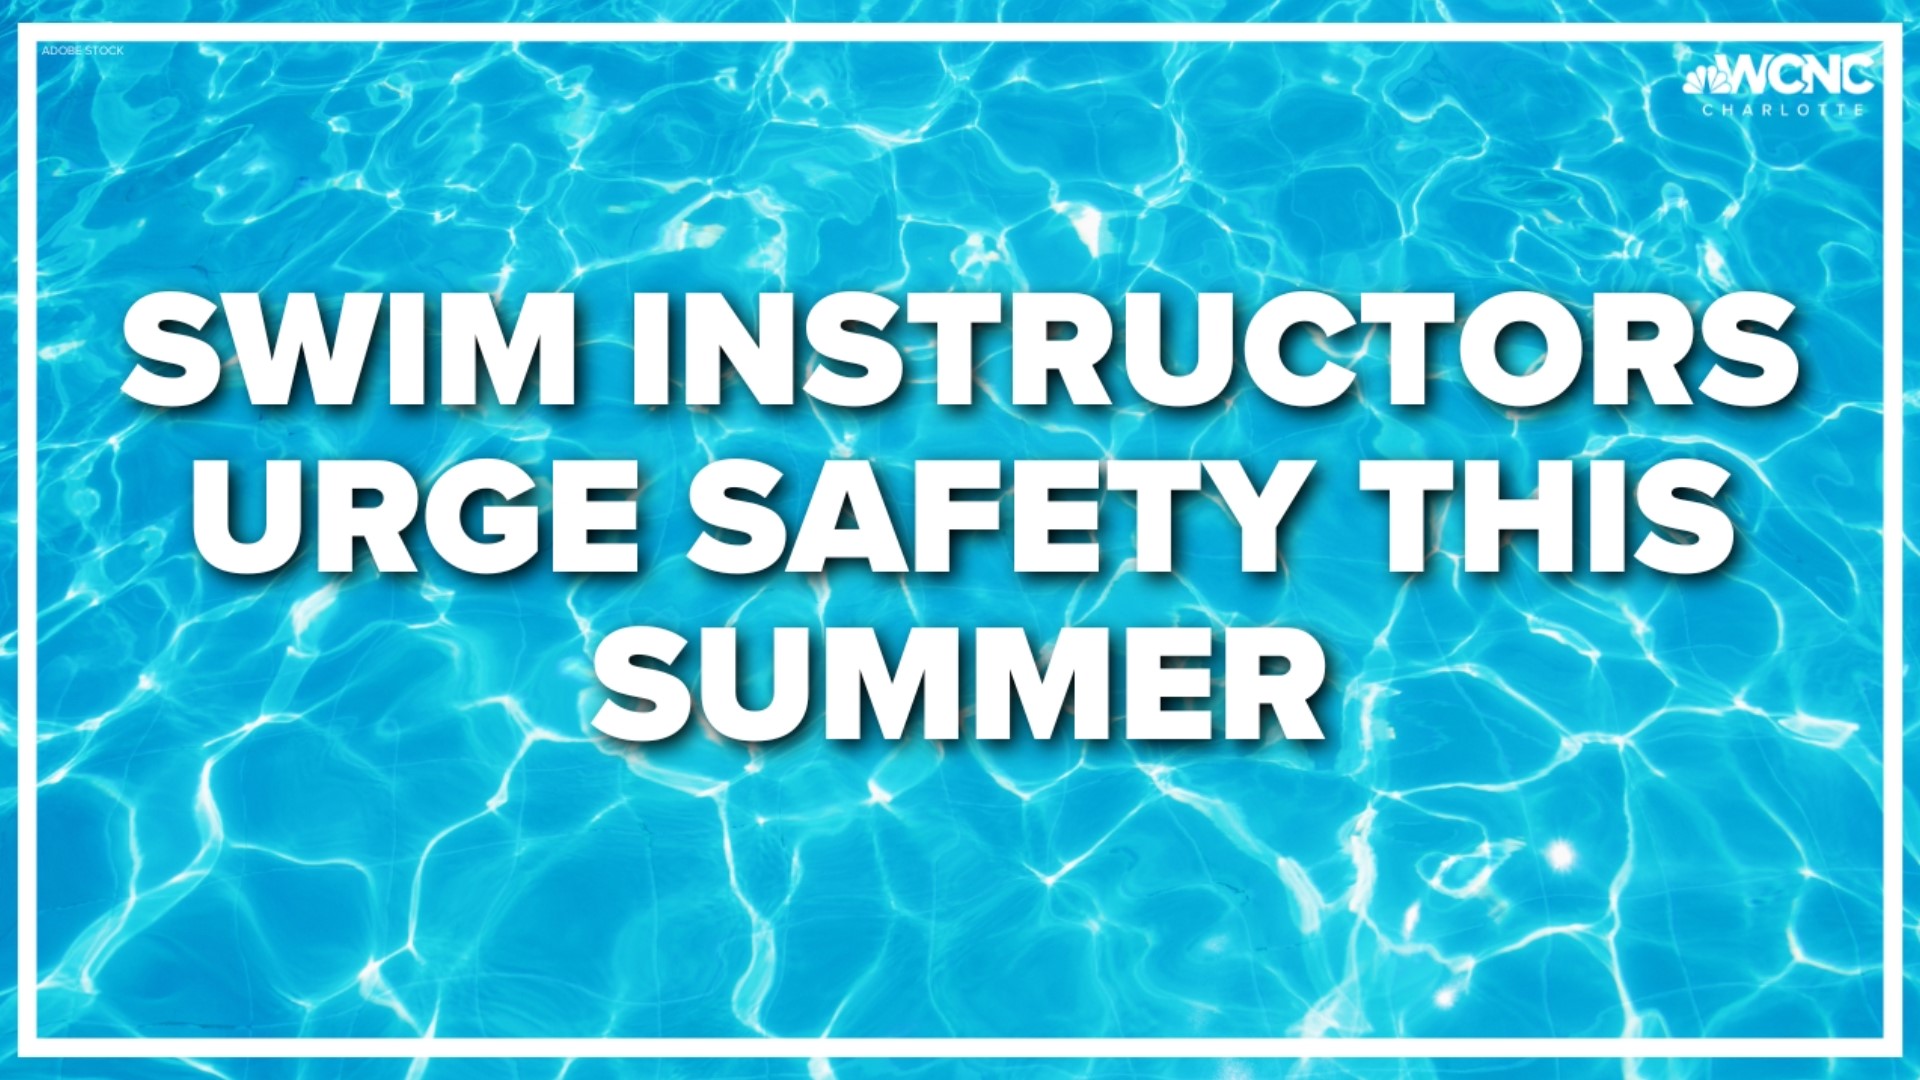 WCNC Charlotte's Austin Walker shares what swim instructors say families should do to stay safe at the pool this summer.